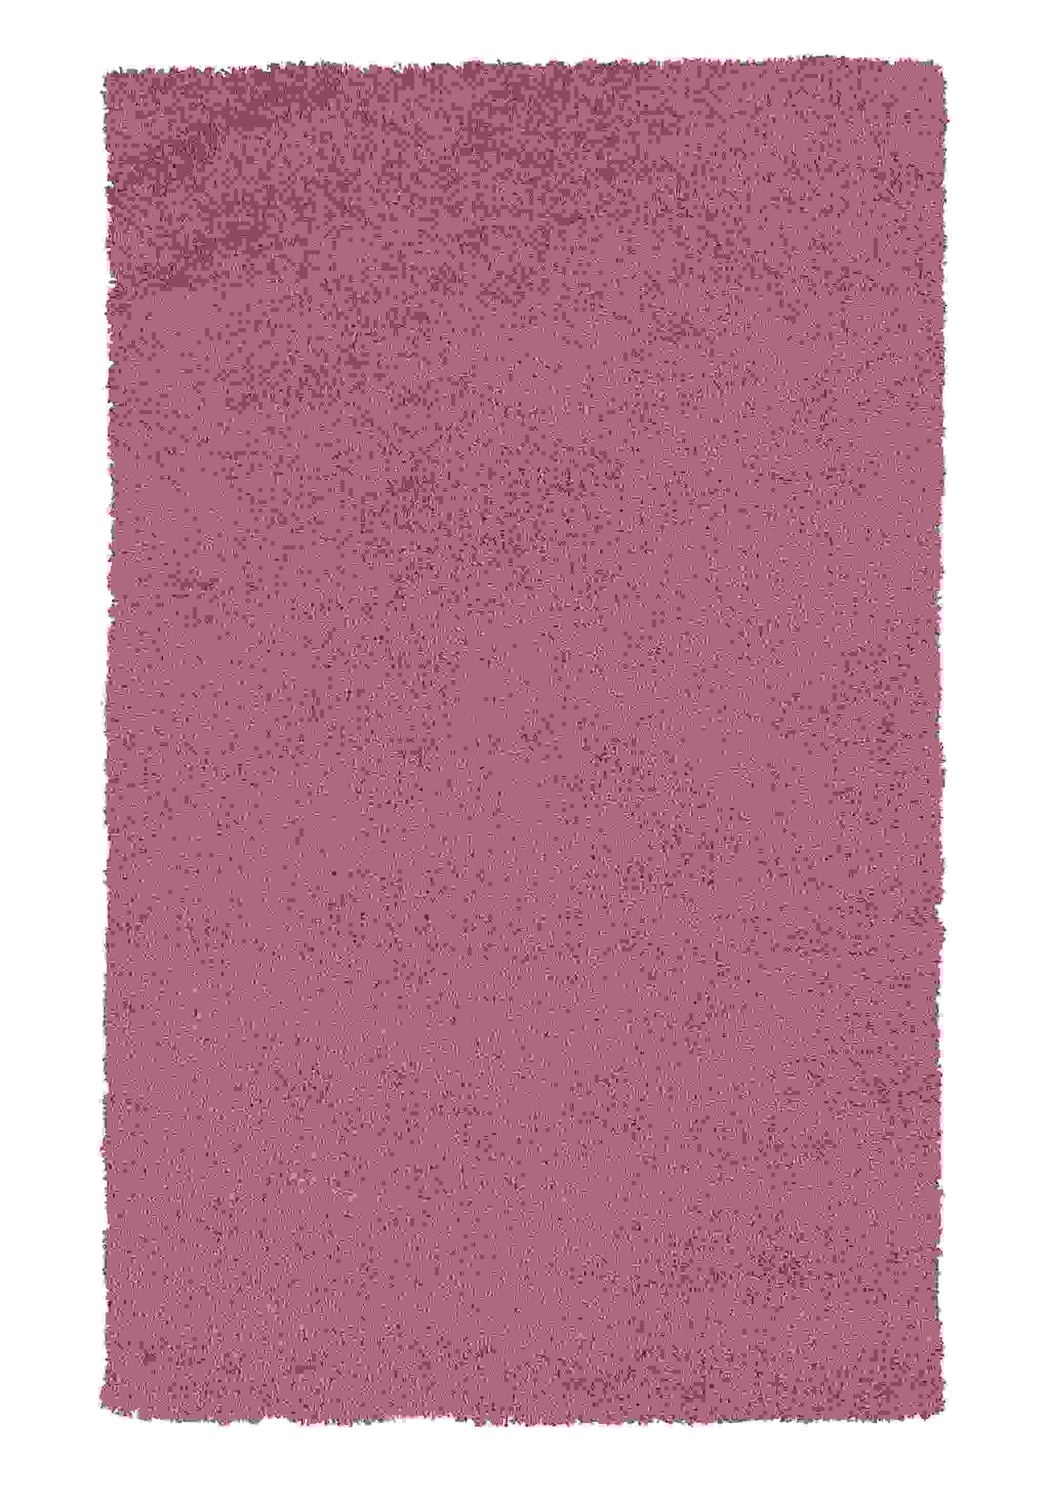 7' x 9' Polyester Hot Pink Area Rug